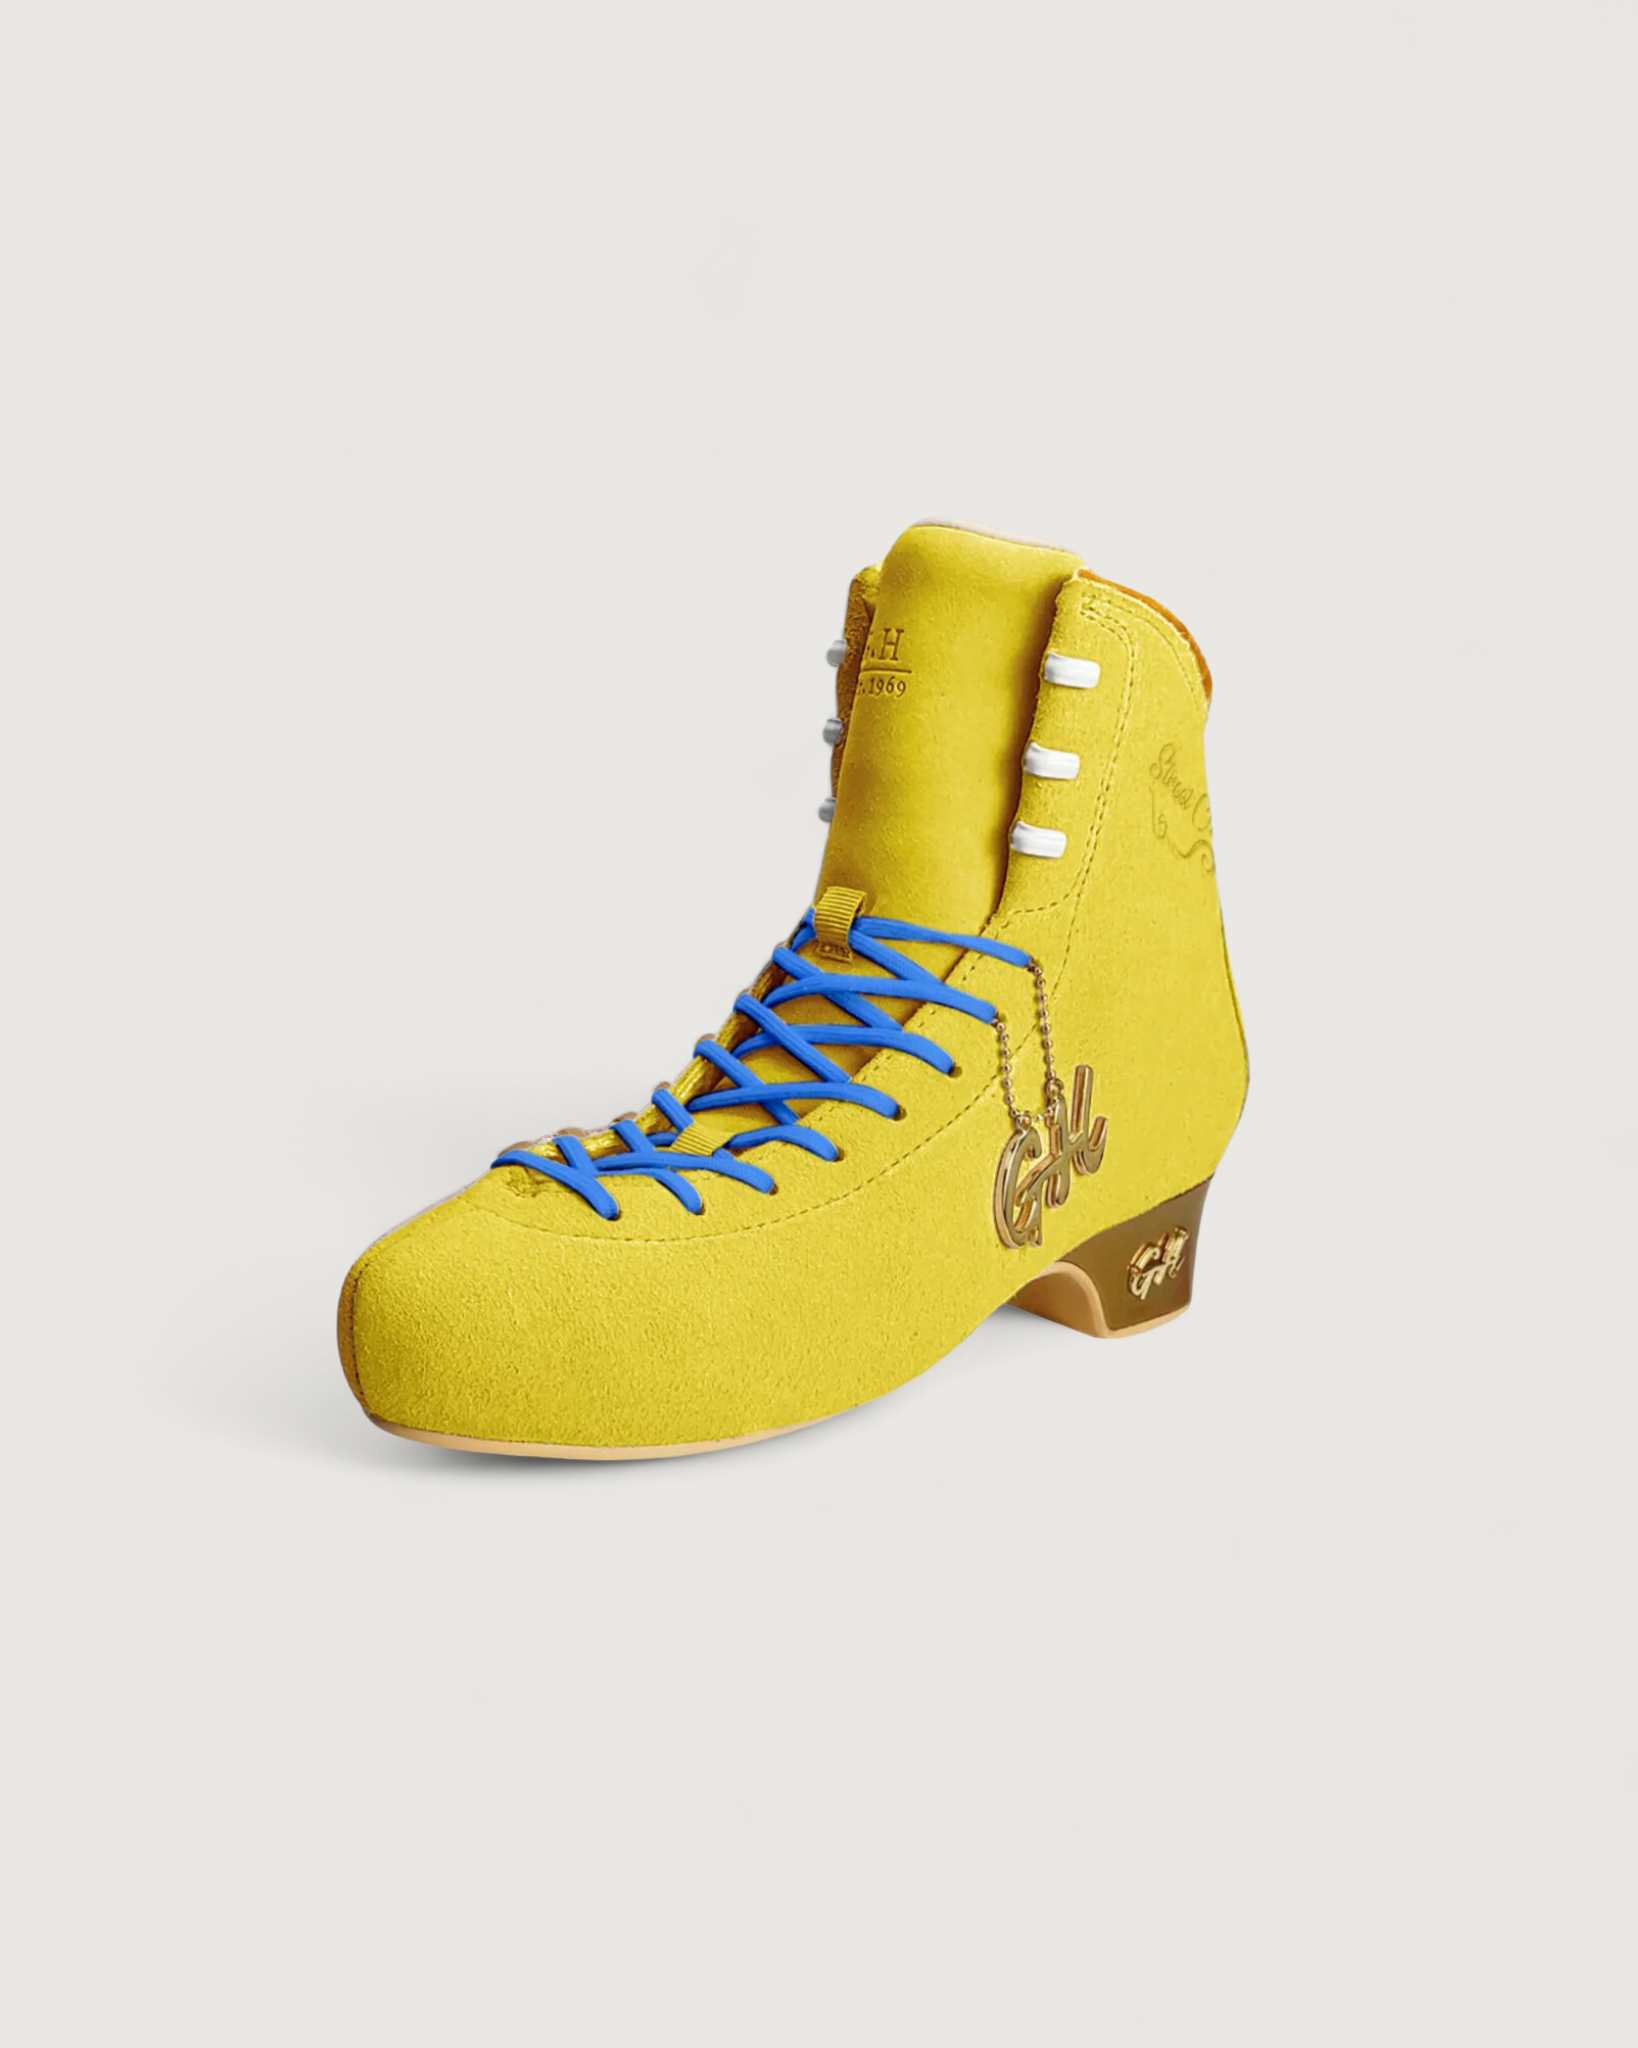 Street Clouds Quad Roller Skates (Boots Only)